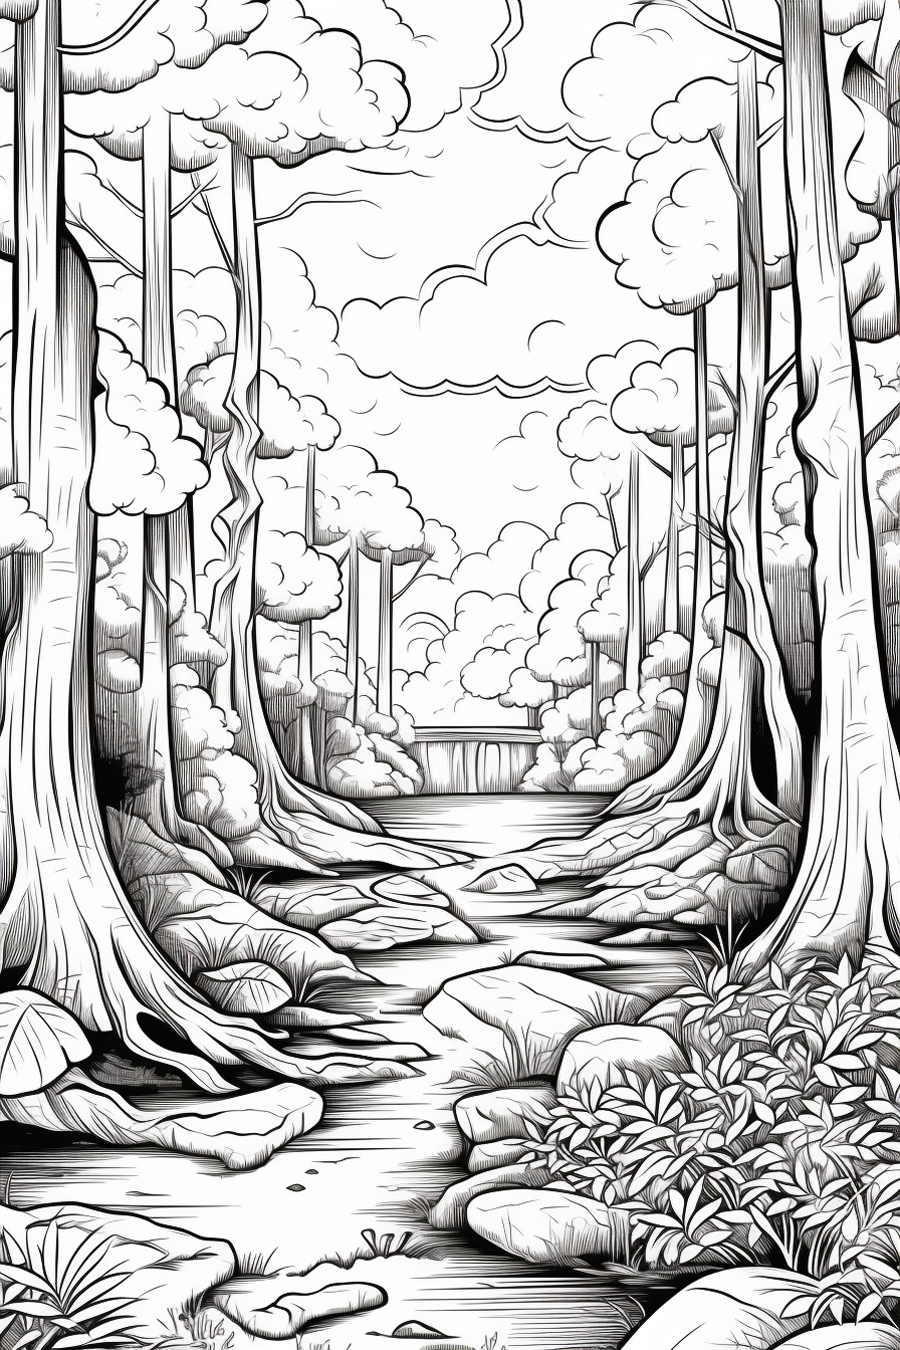 A black and white drawing of a river running through a forest.